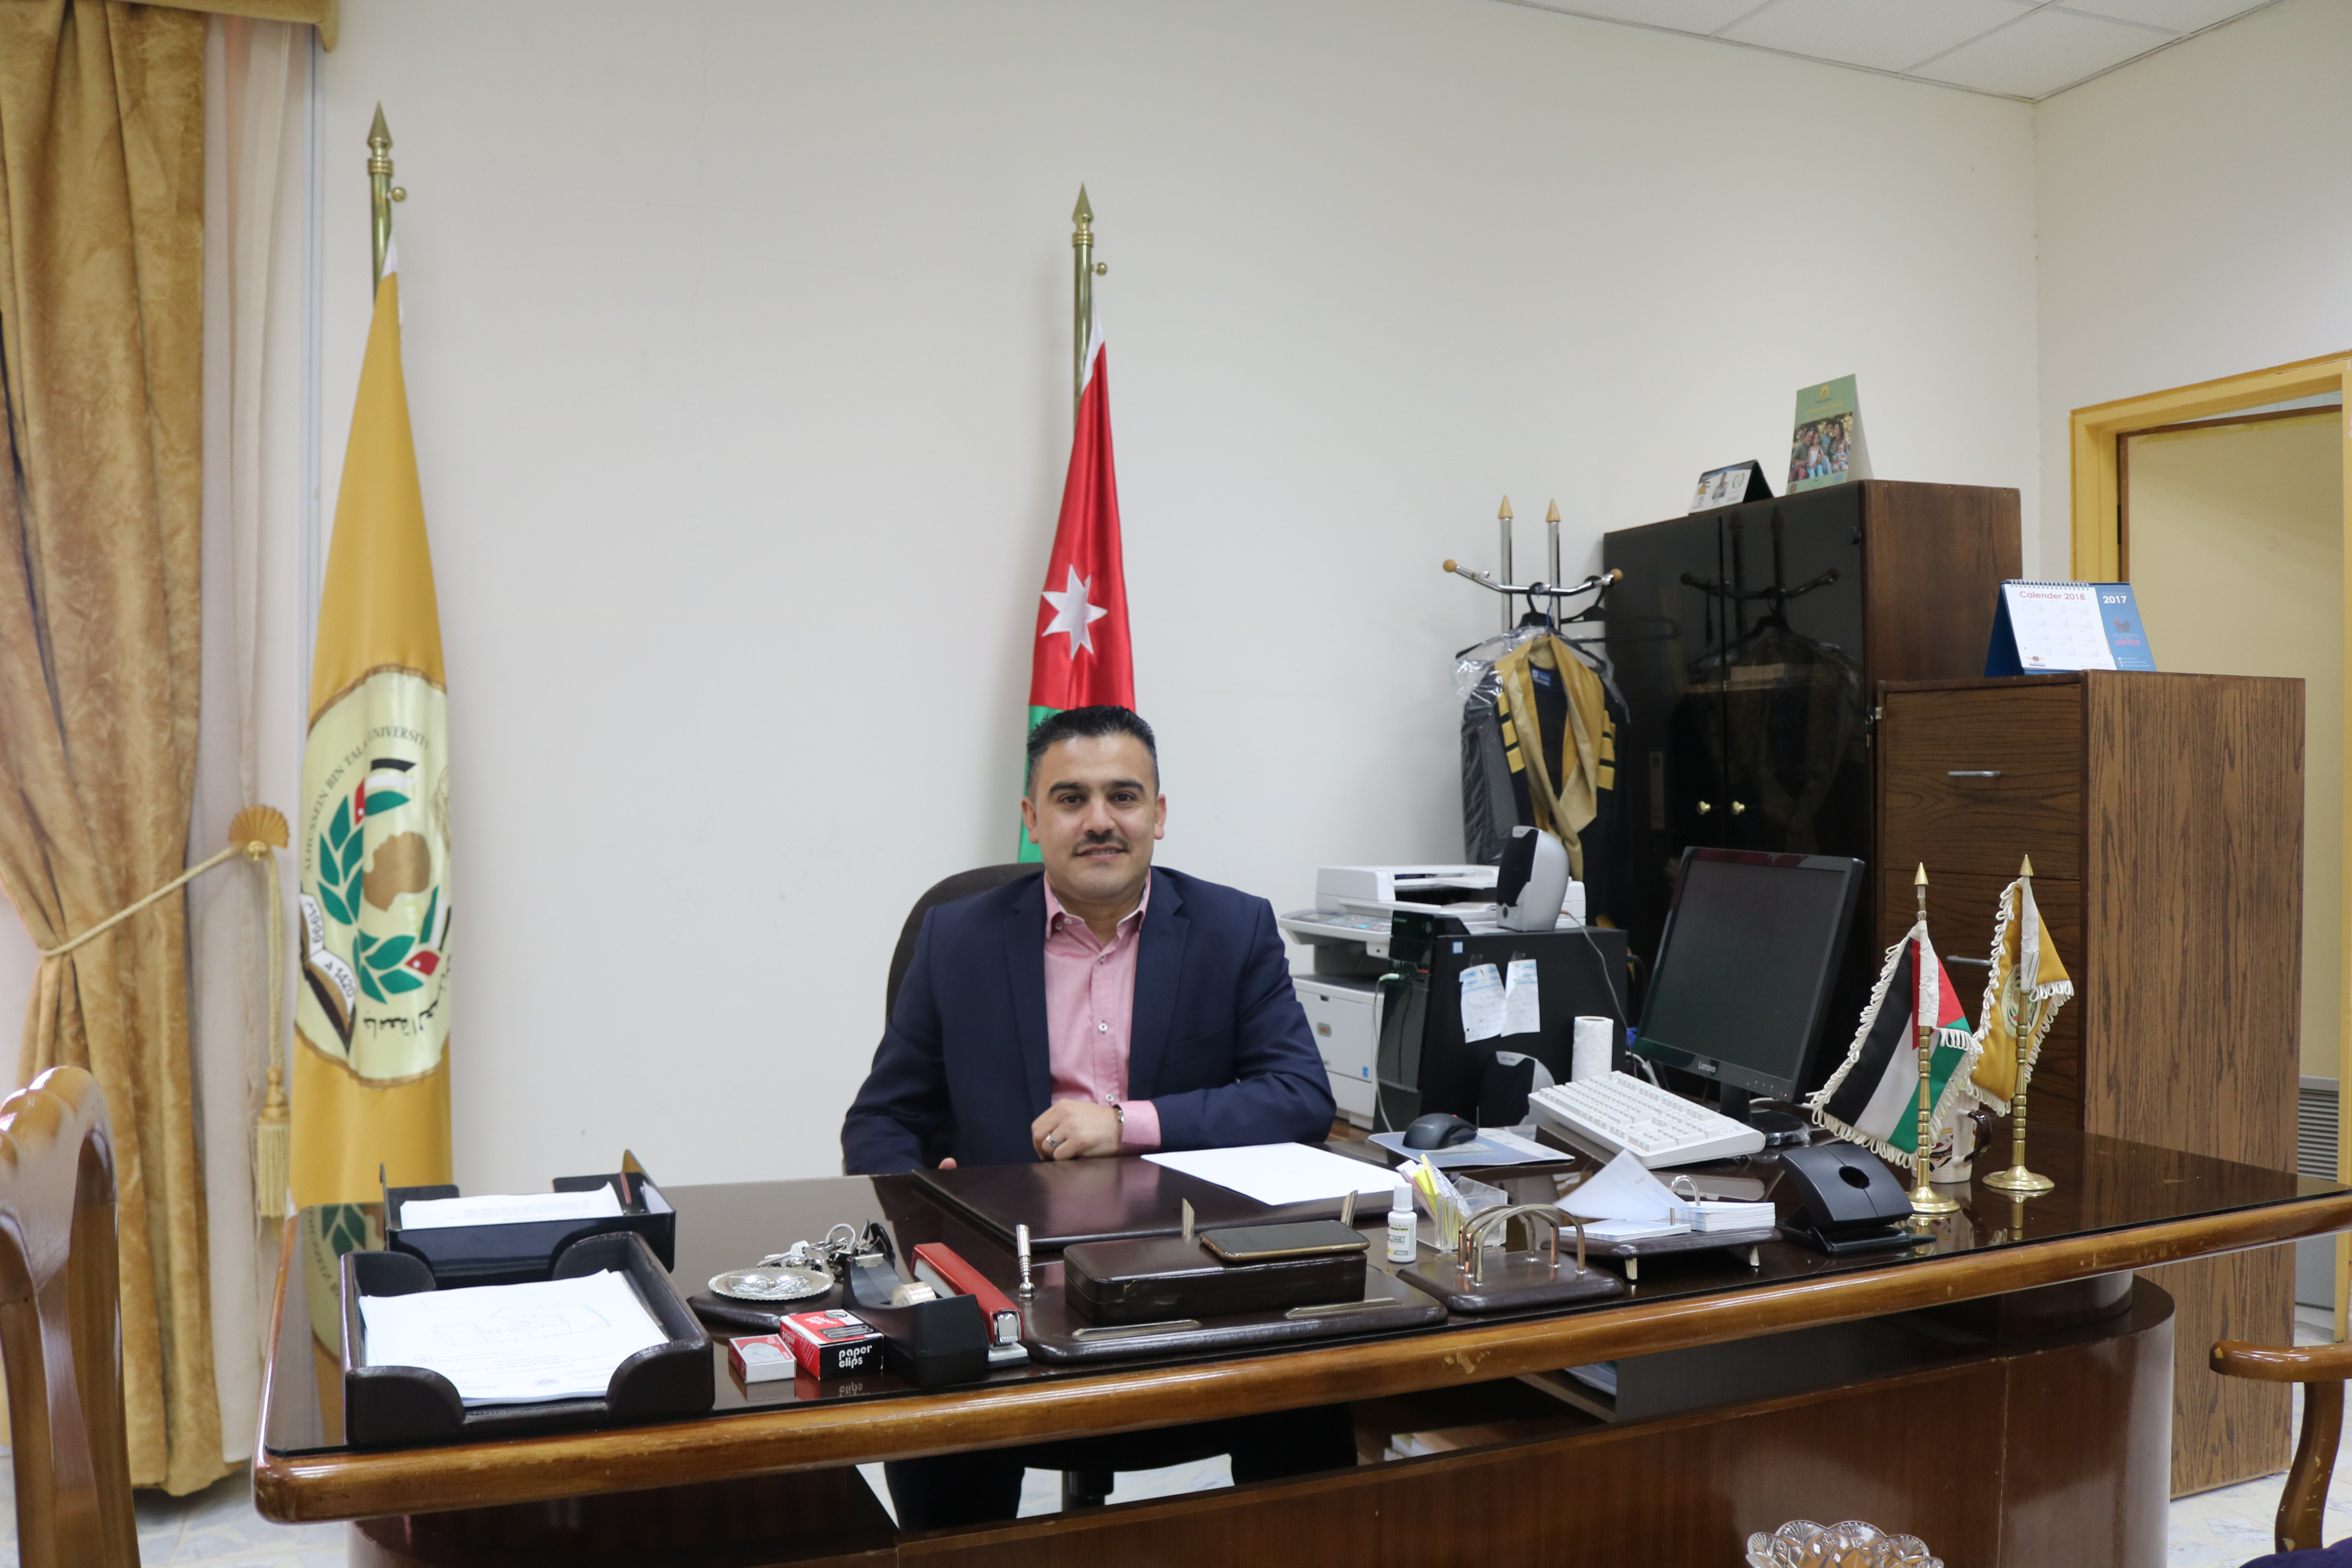 Assignment of Prof. Dr. Ahmed Abu Gari as Advisor to the Rector for Scientific Affairs